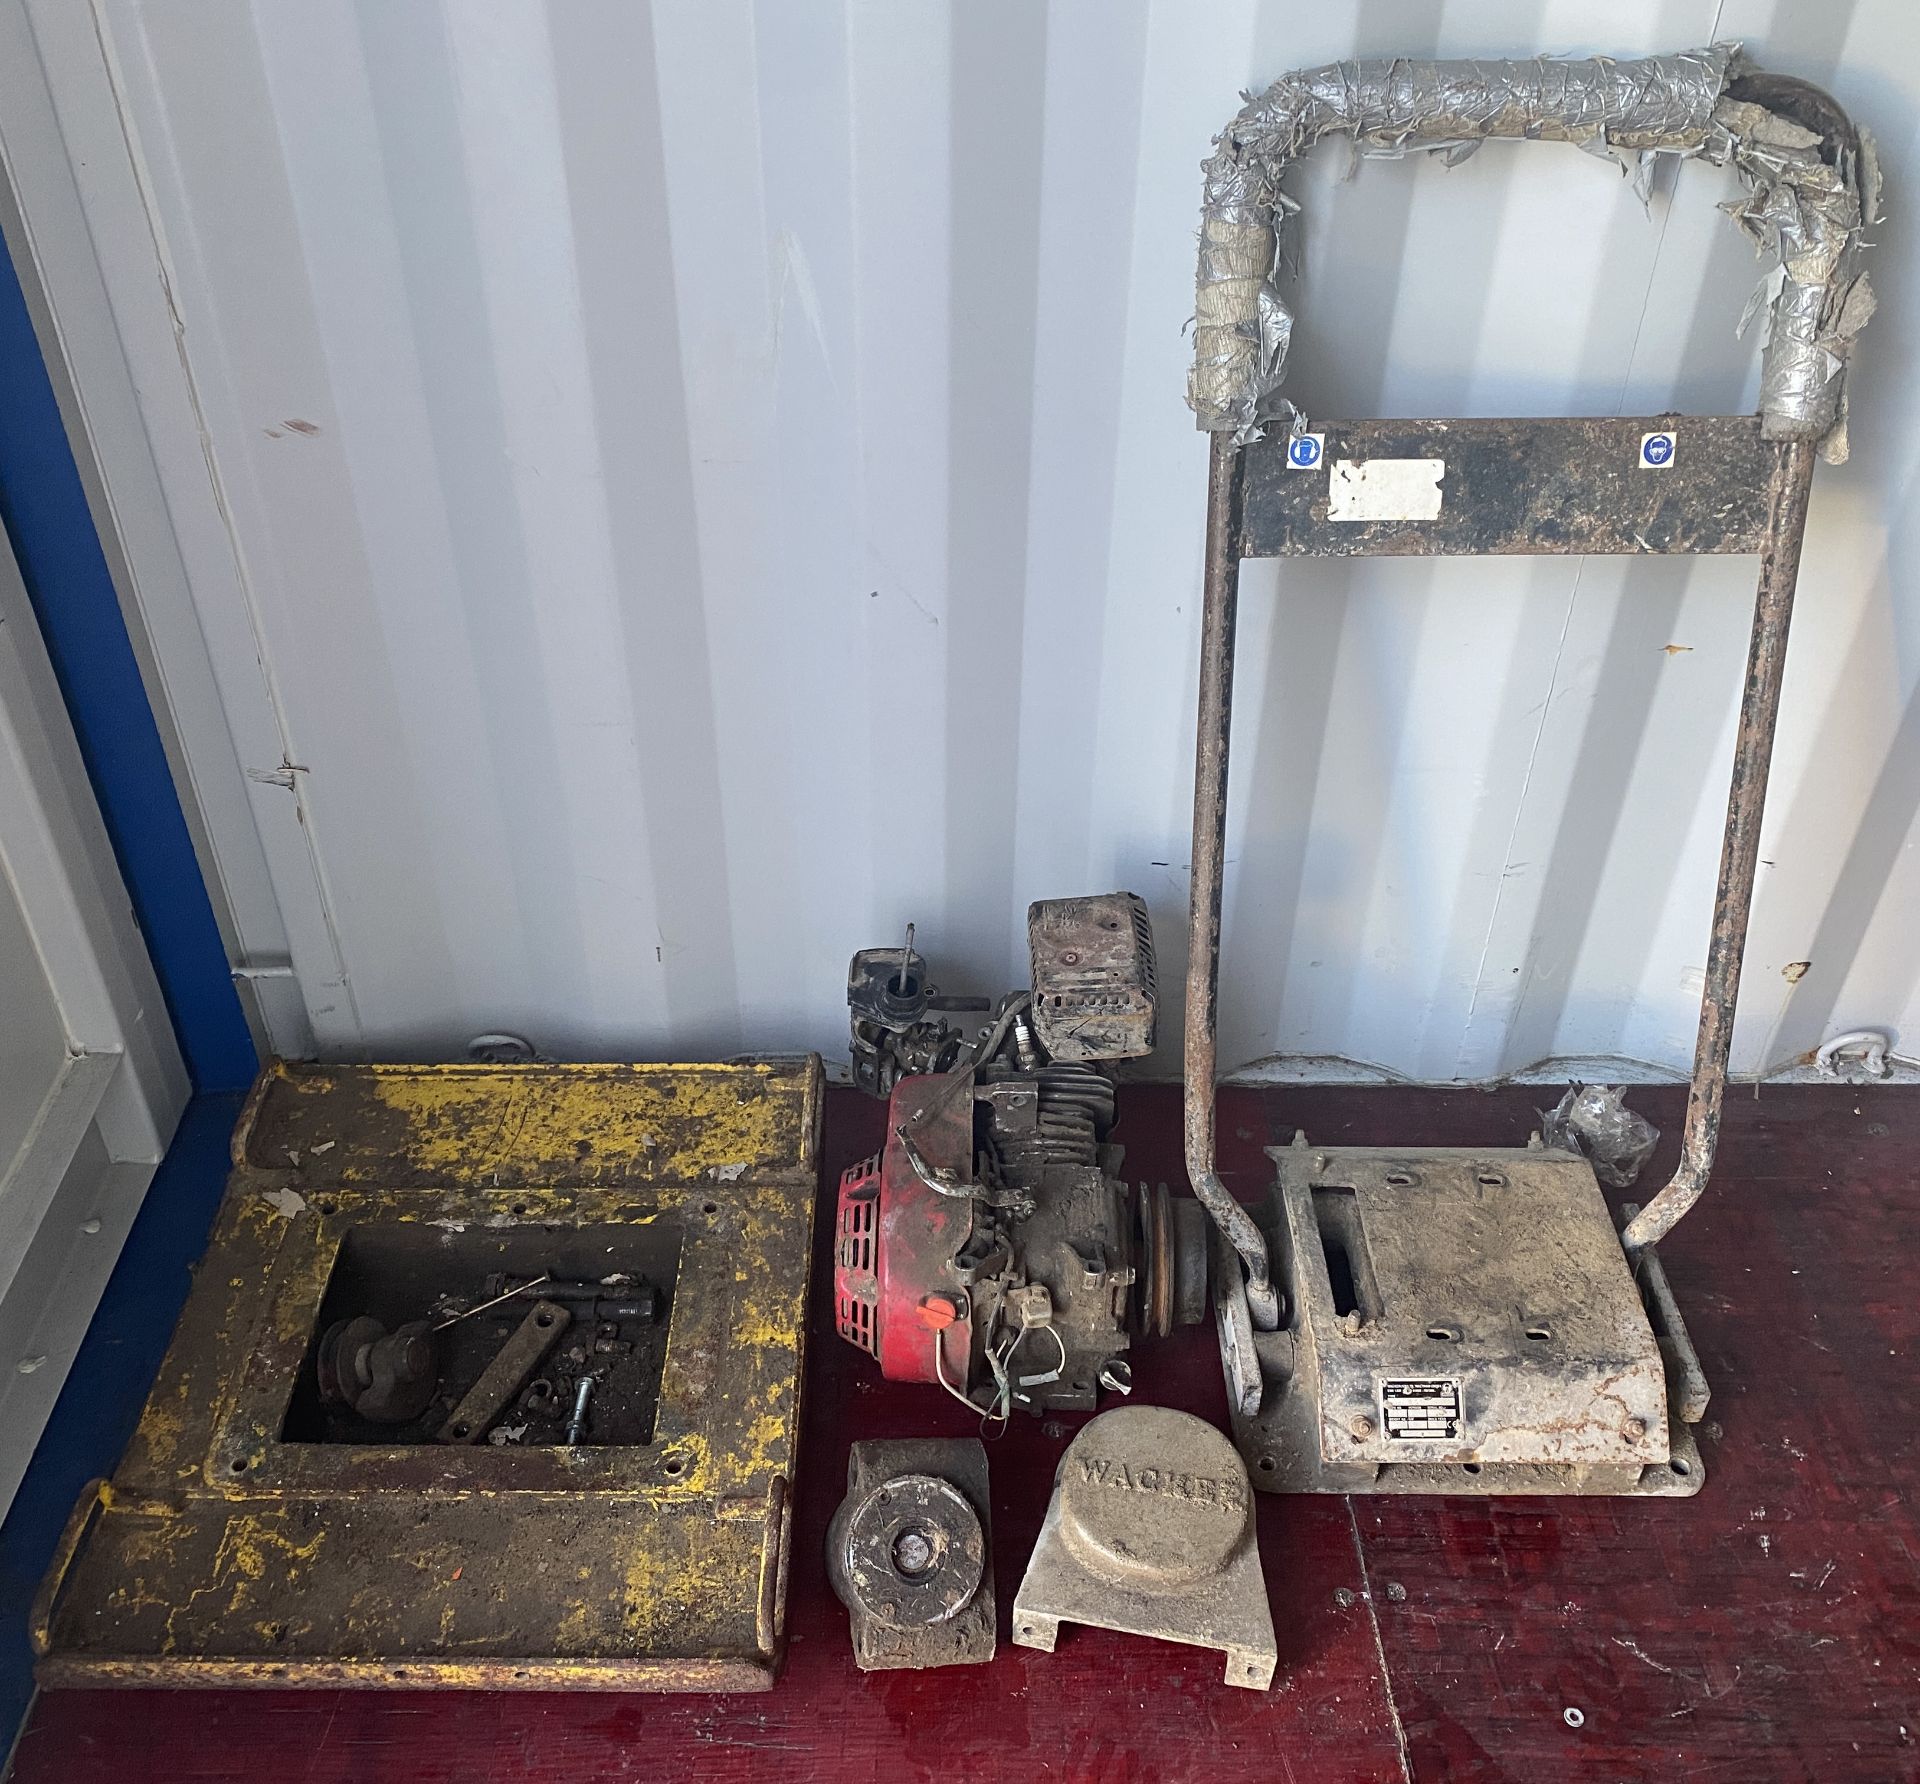 WACKER PLATE (Model 6850) - Disassembled & incomplete - Spares and repairs - YOM 1999 (saleroom